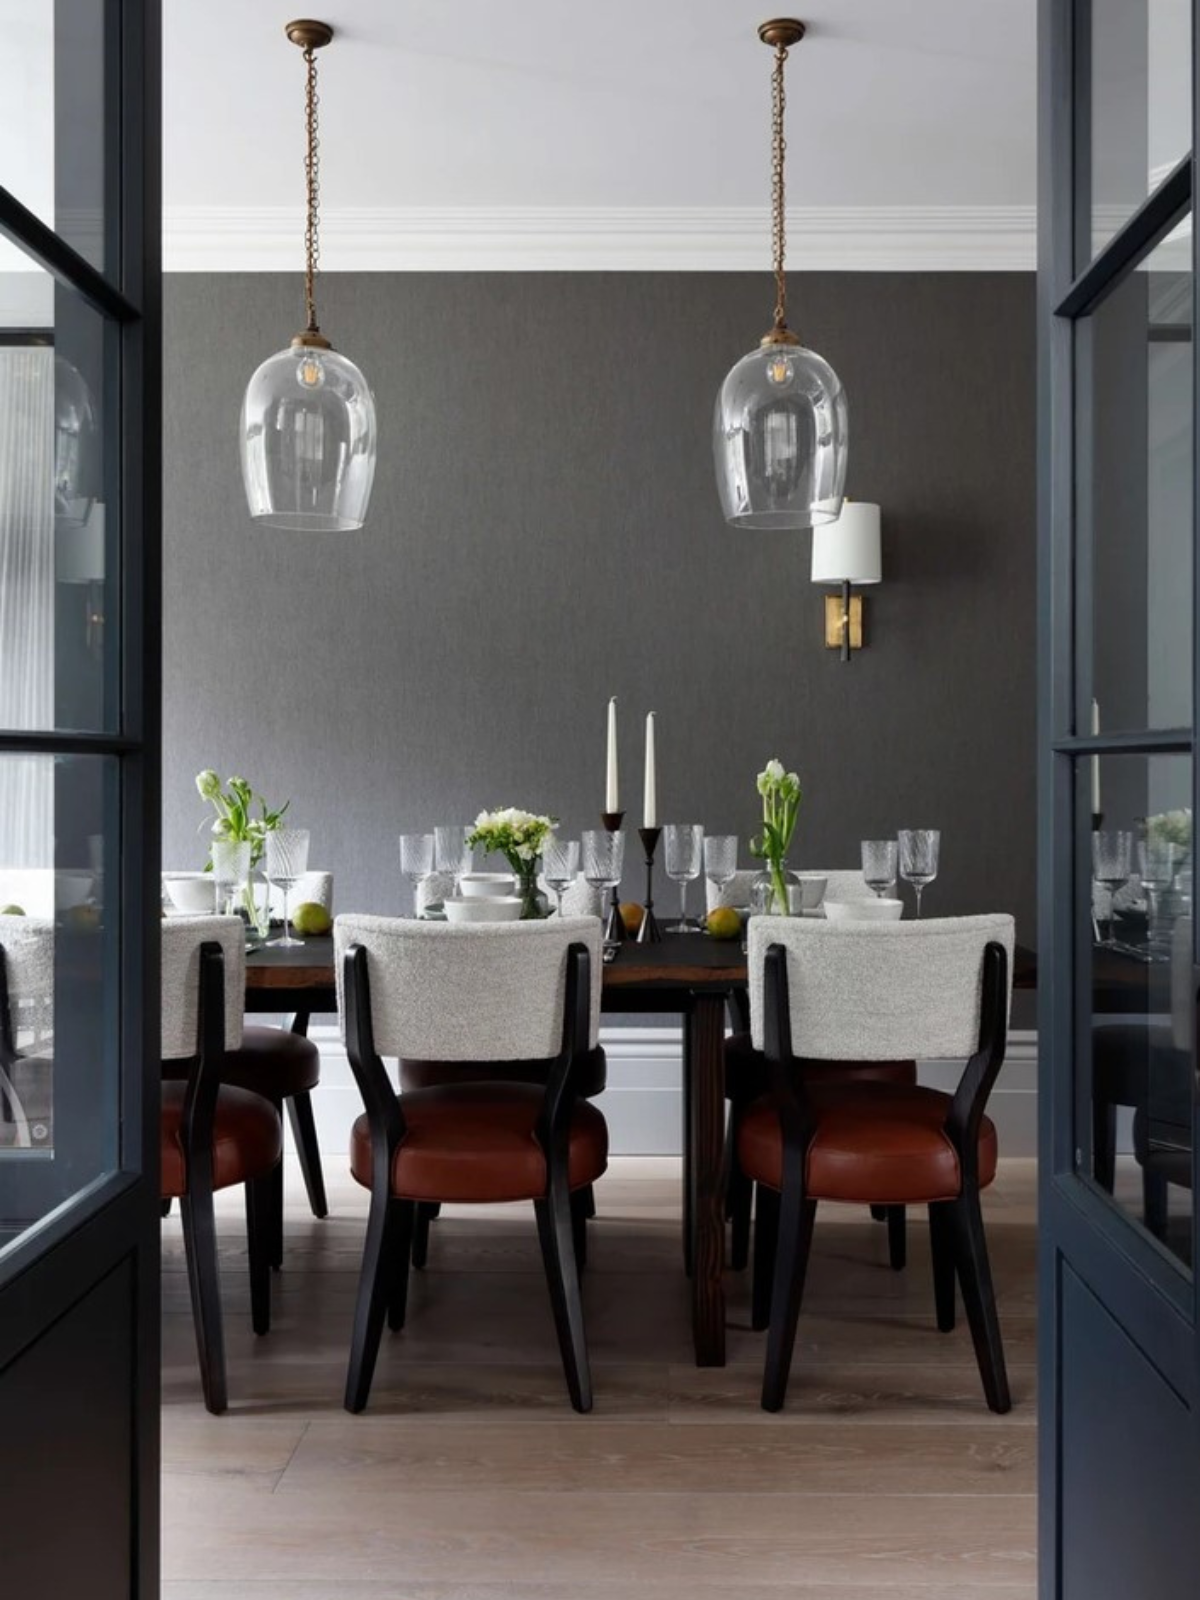 a door that opens to dining area showing grey wall accent, glass pendant lights, upholstered dining chairs and wooden floor